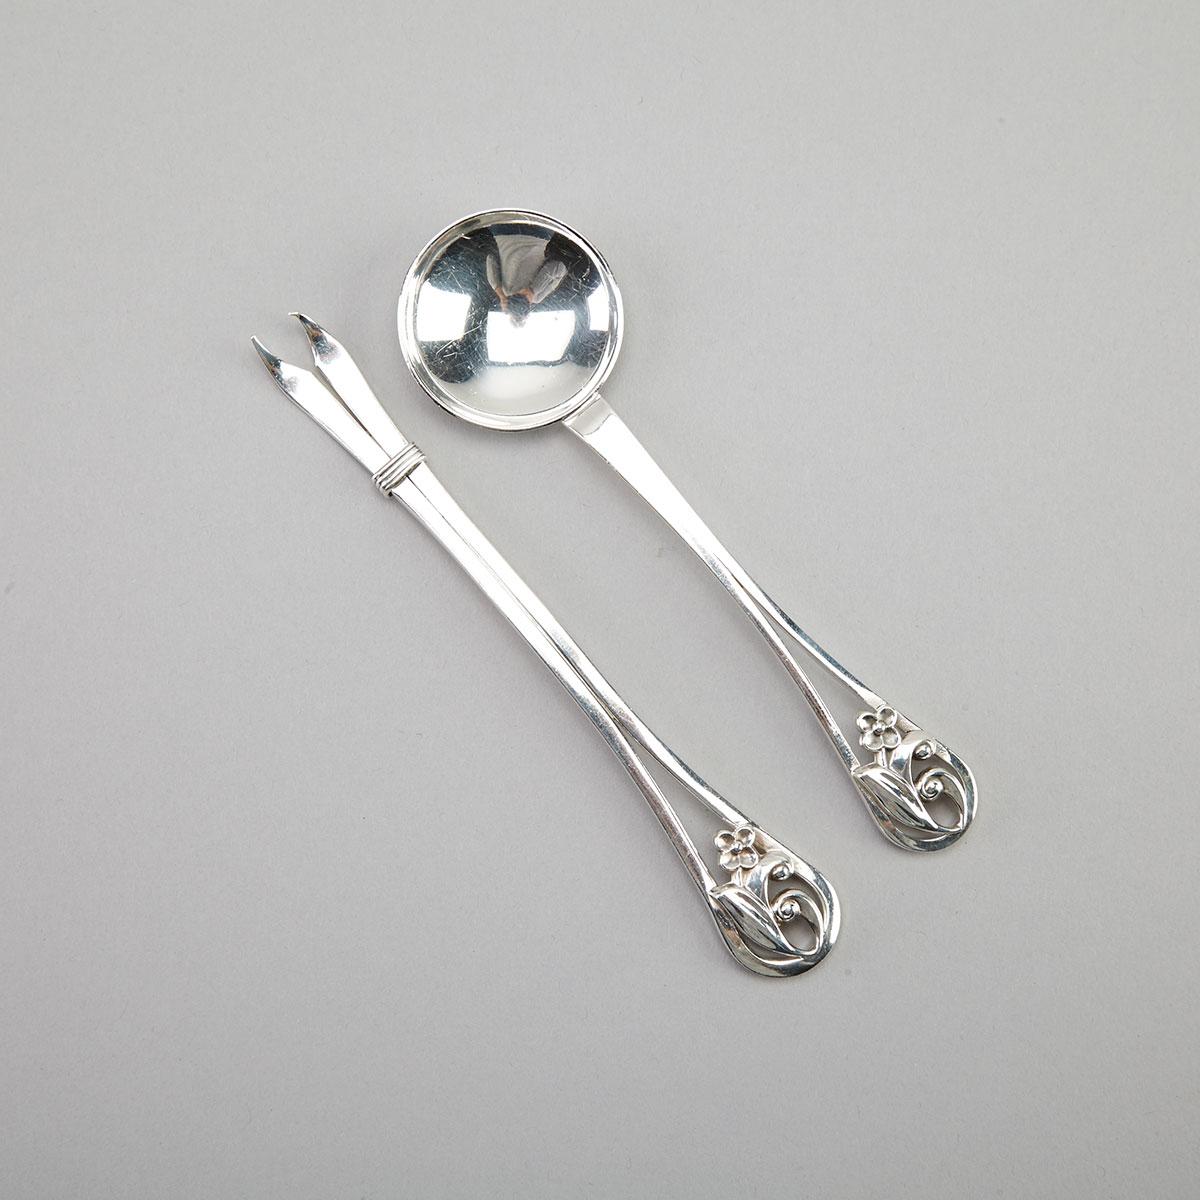 American Silver Condiment Spoon and Fork, Alphonse LaPaglia for Georg Jensen Inc., New York, N.Y., mid-20th century